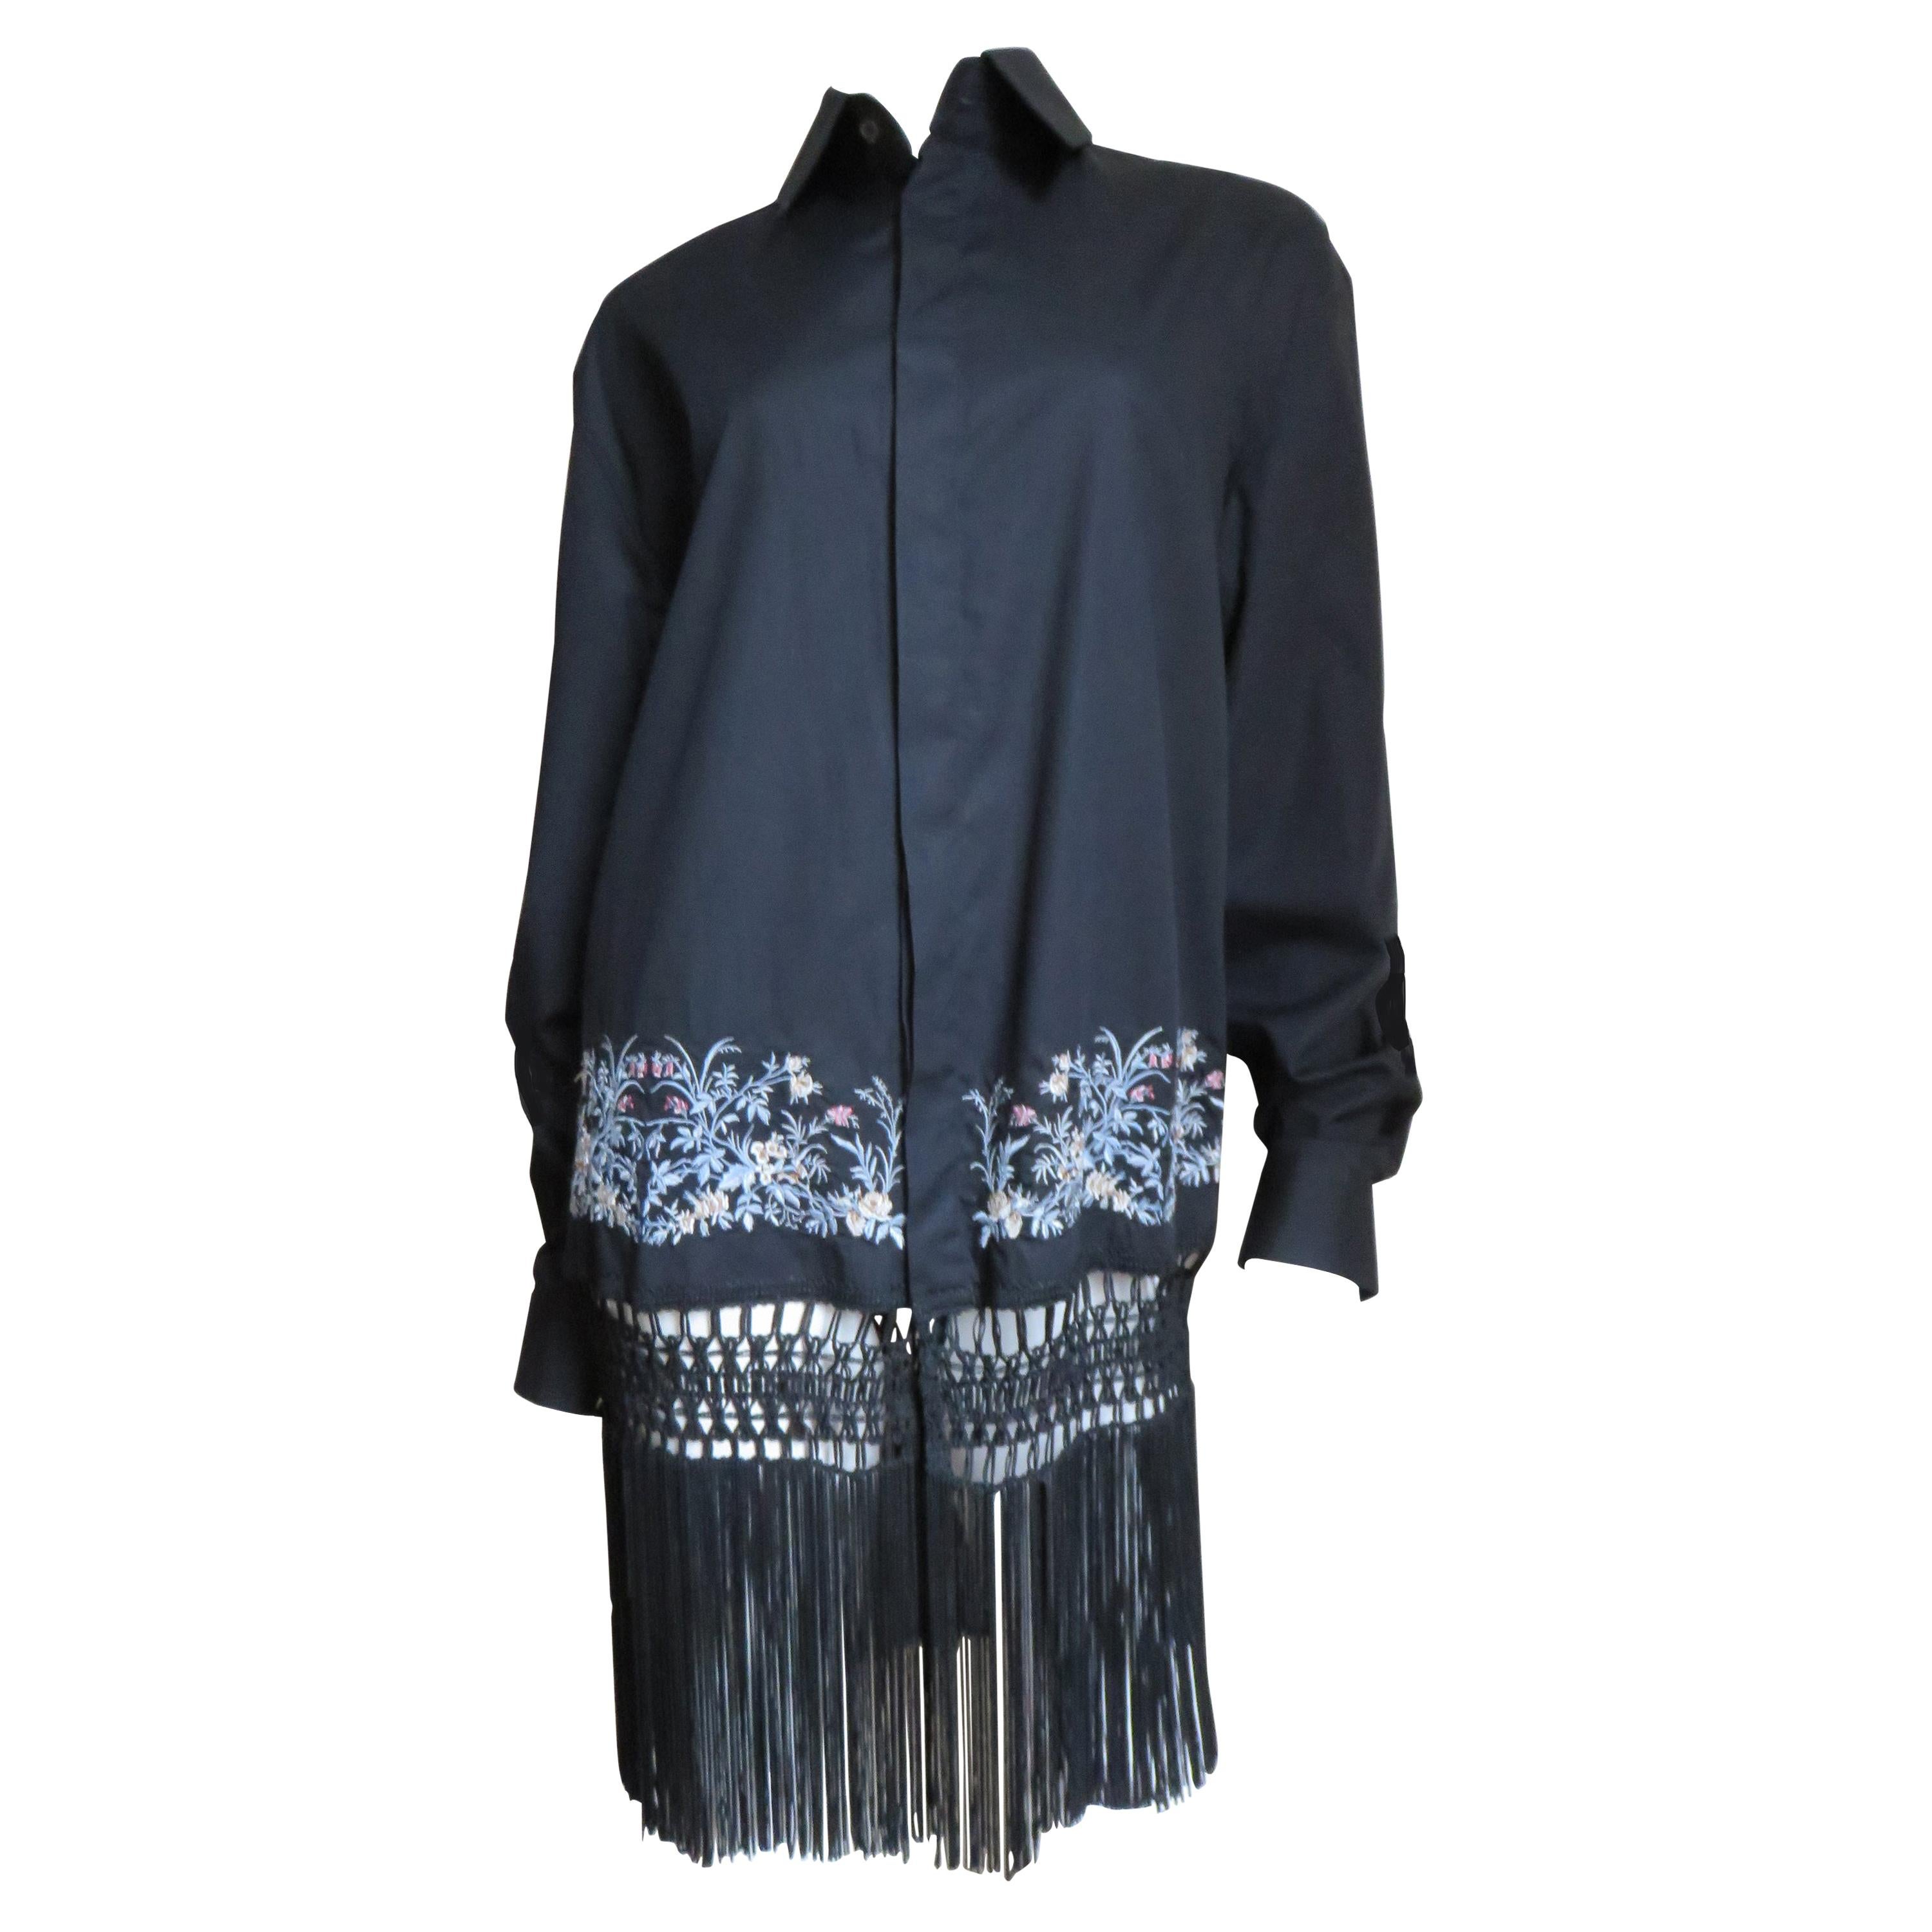 Alexander McQueen New Fringe Embroidery Shirt S/S 1999 For Sale